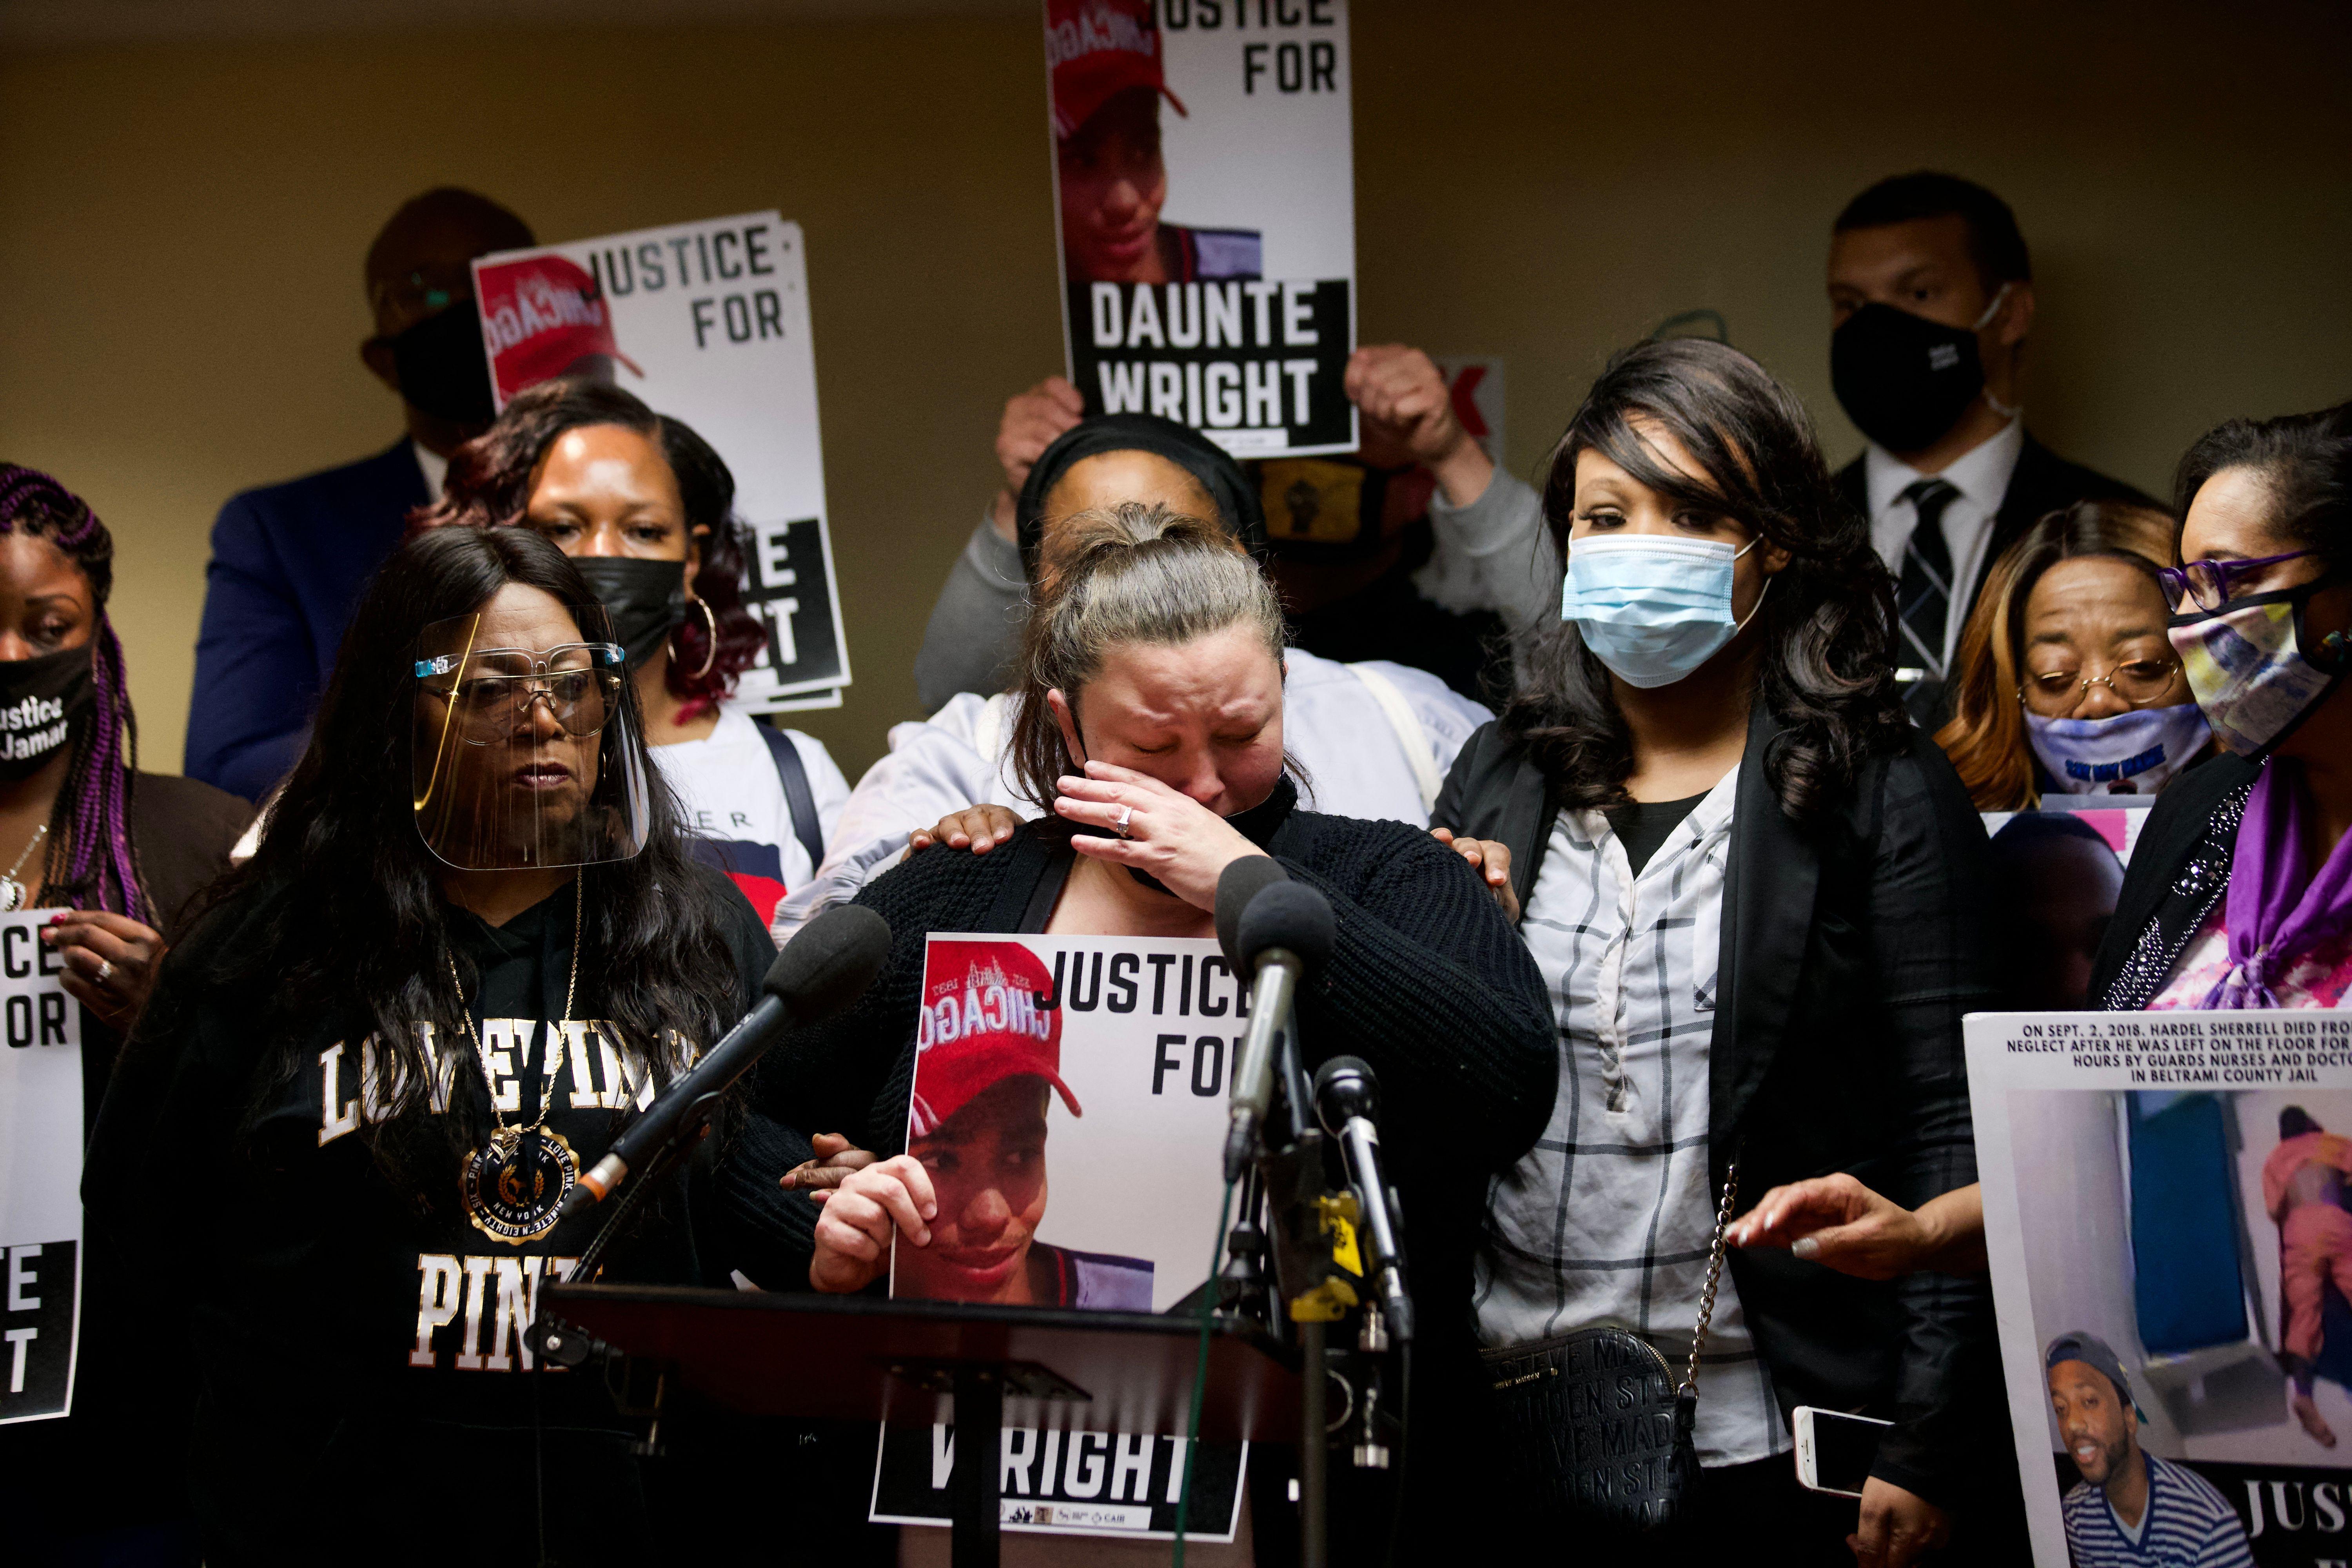 Katie Wright cries as she stands at a mic surrounded by supporters. Several, including Katie, are holding posters that say "Justice for Daunte Wright."